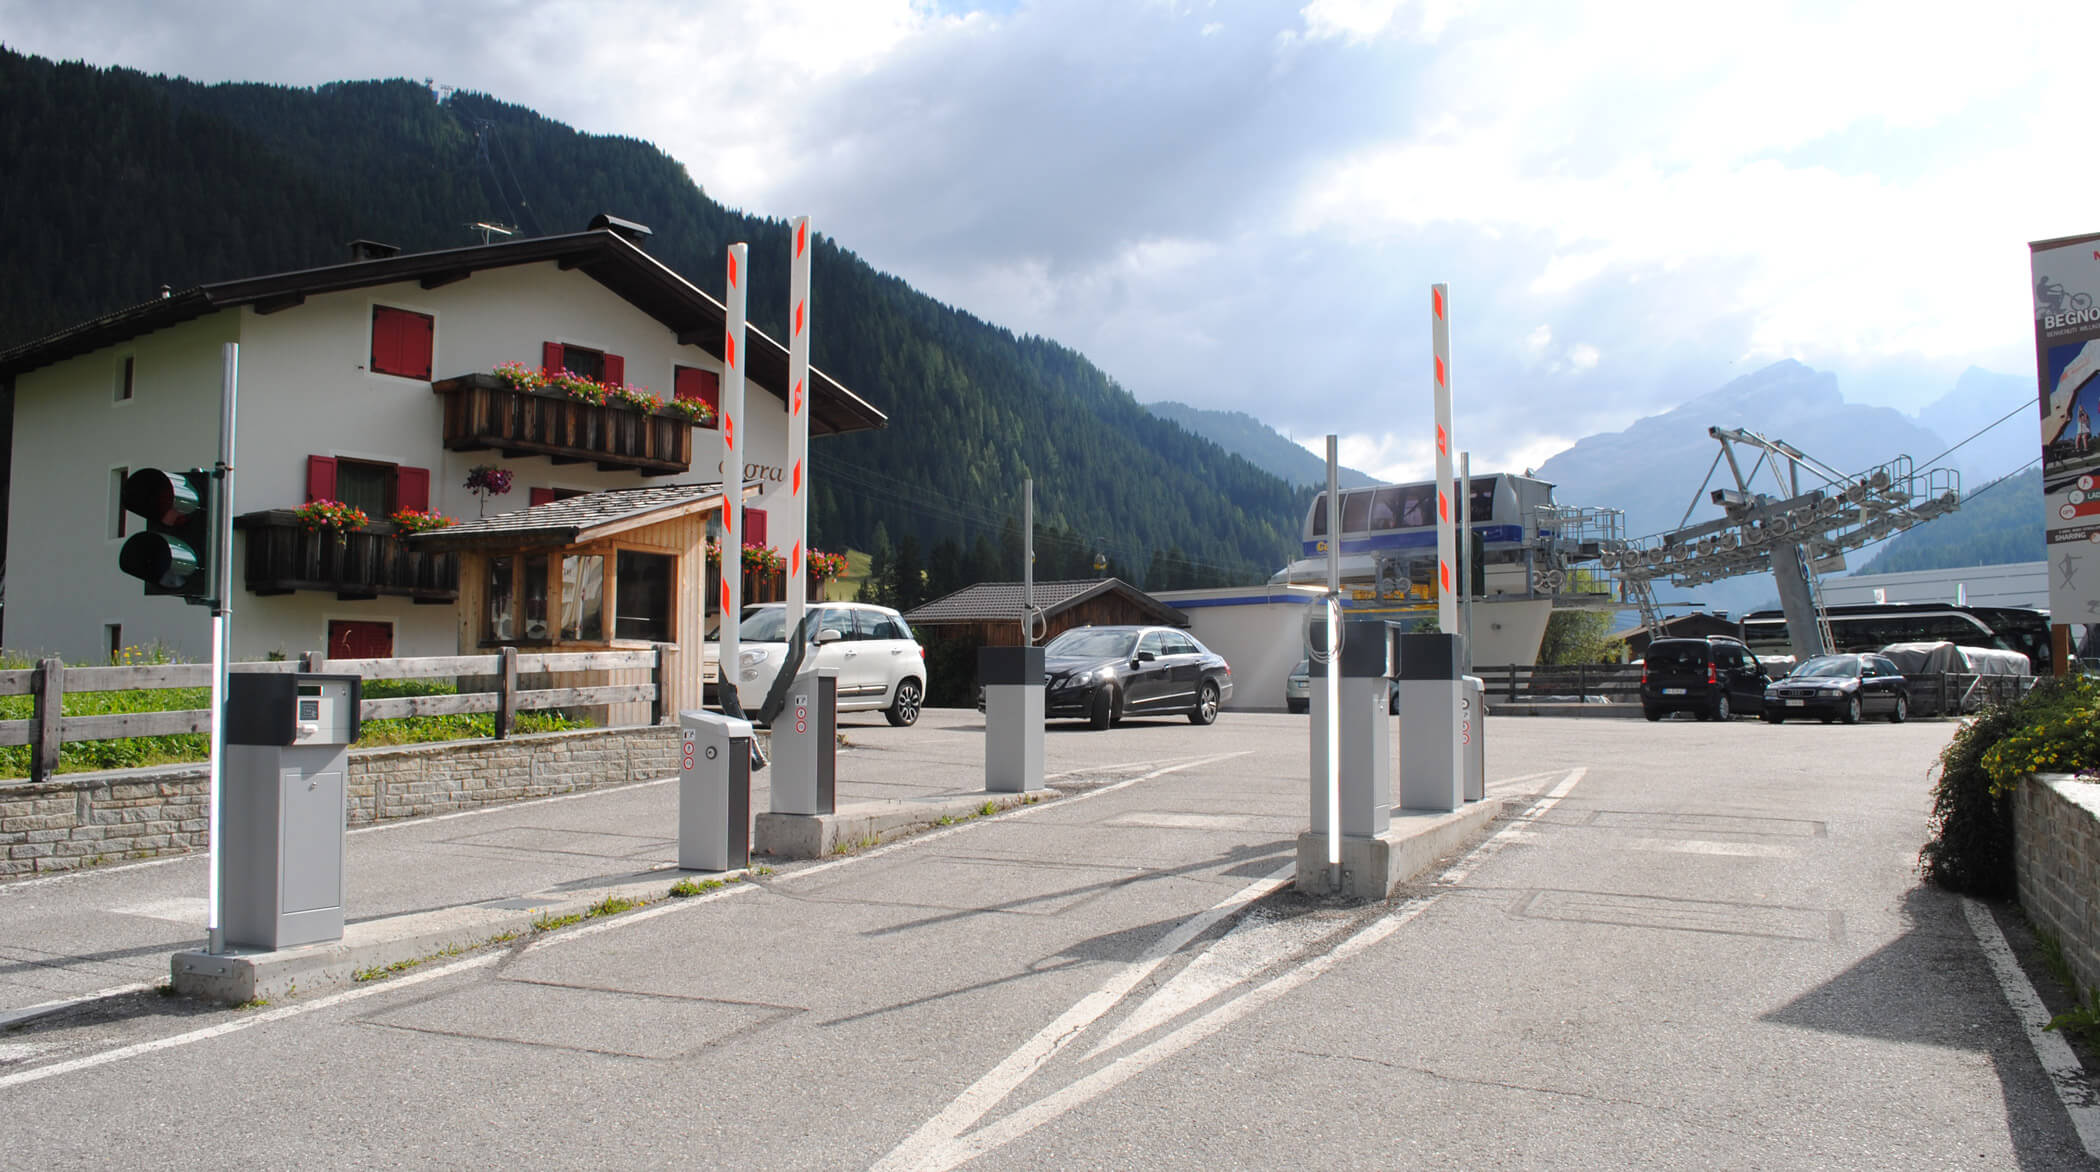 Parkschein Automat (car parking ticket machine) in front of huge mountains  in Tirol, Austria. Travelling in Europe with a car and looking for a  parking lot. The environment is beautiful. Nature Stock